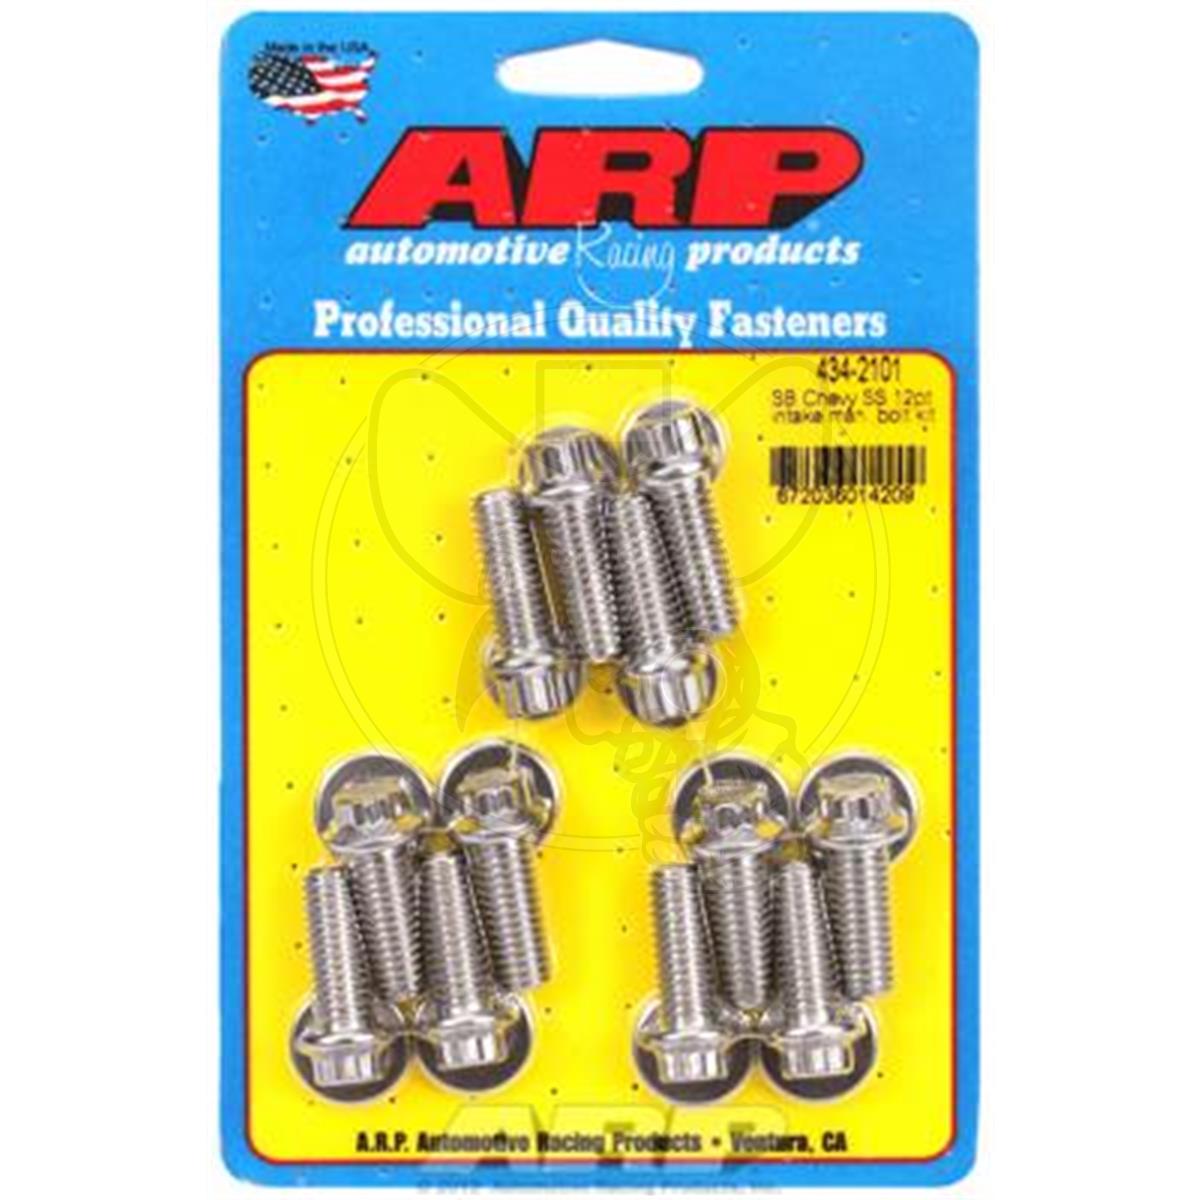 ARP INTAKE MANIFOLD BOLT KIT FITS SMALL BLOCK CHEV 12PT STAINLESS STEEL